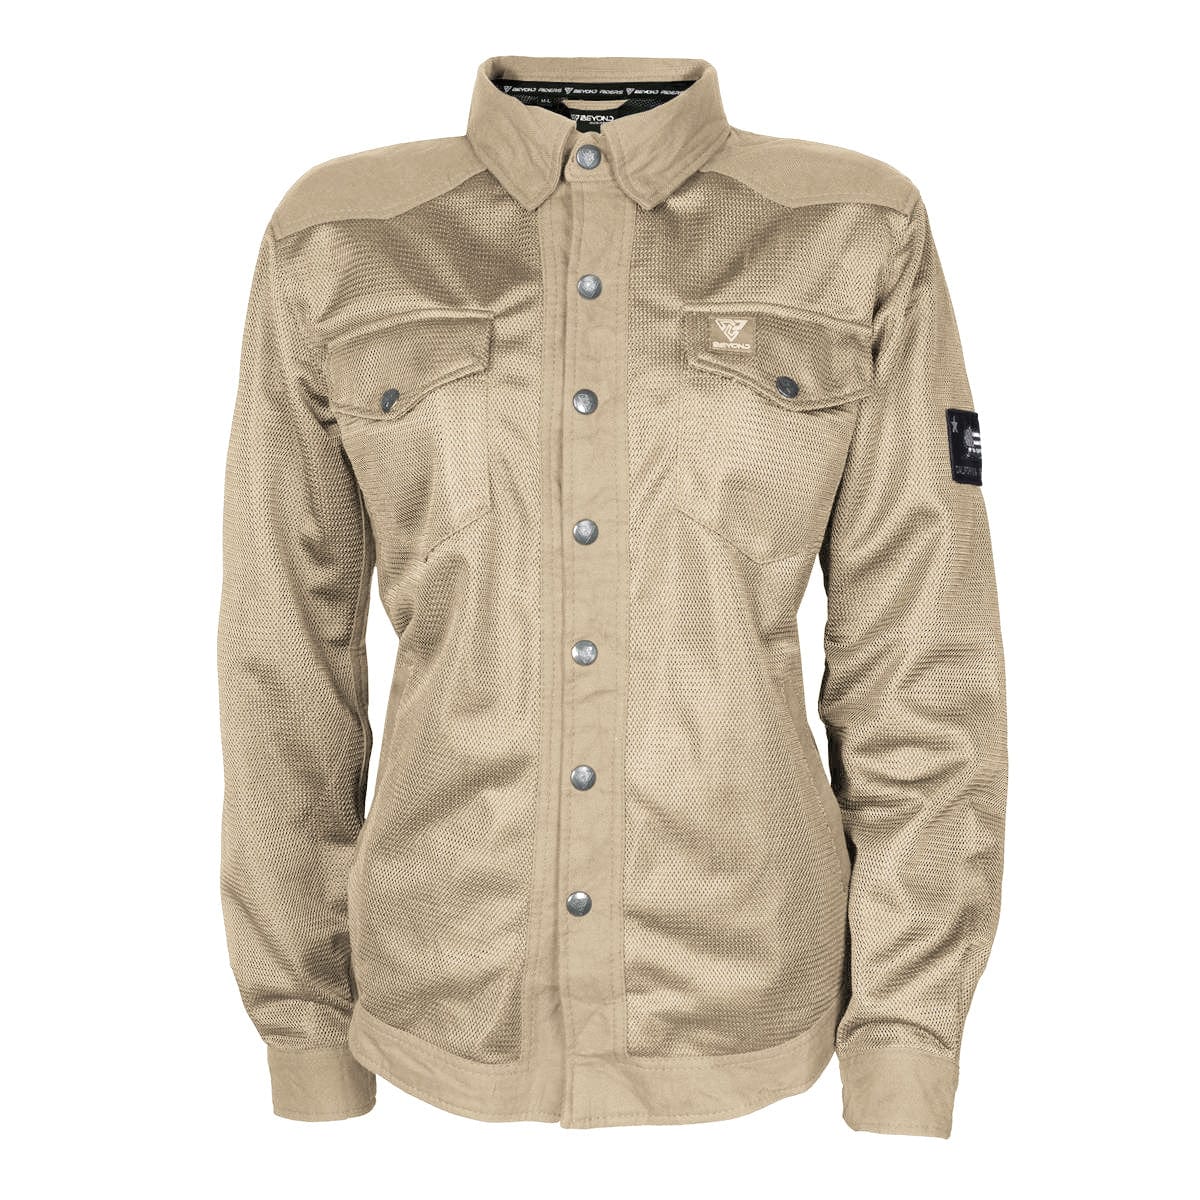 Protective Summer Mesh Shirt for Women - Khaki Solid with Pads